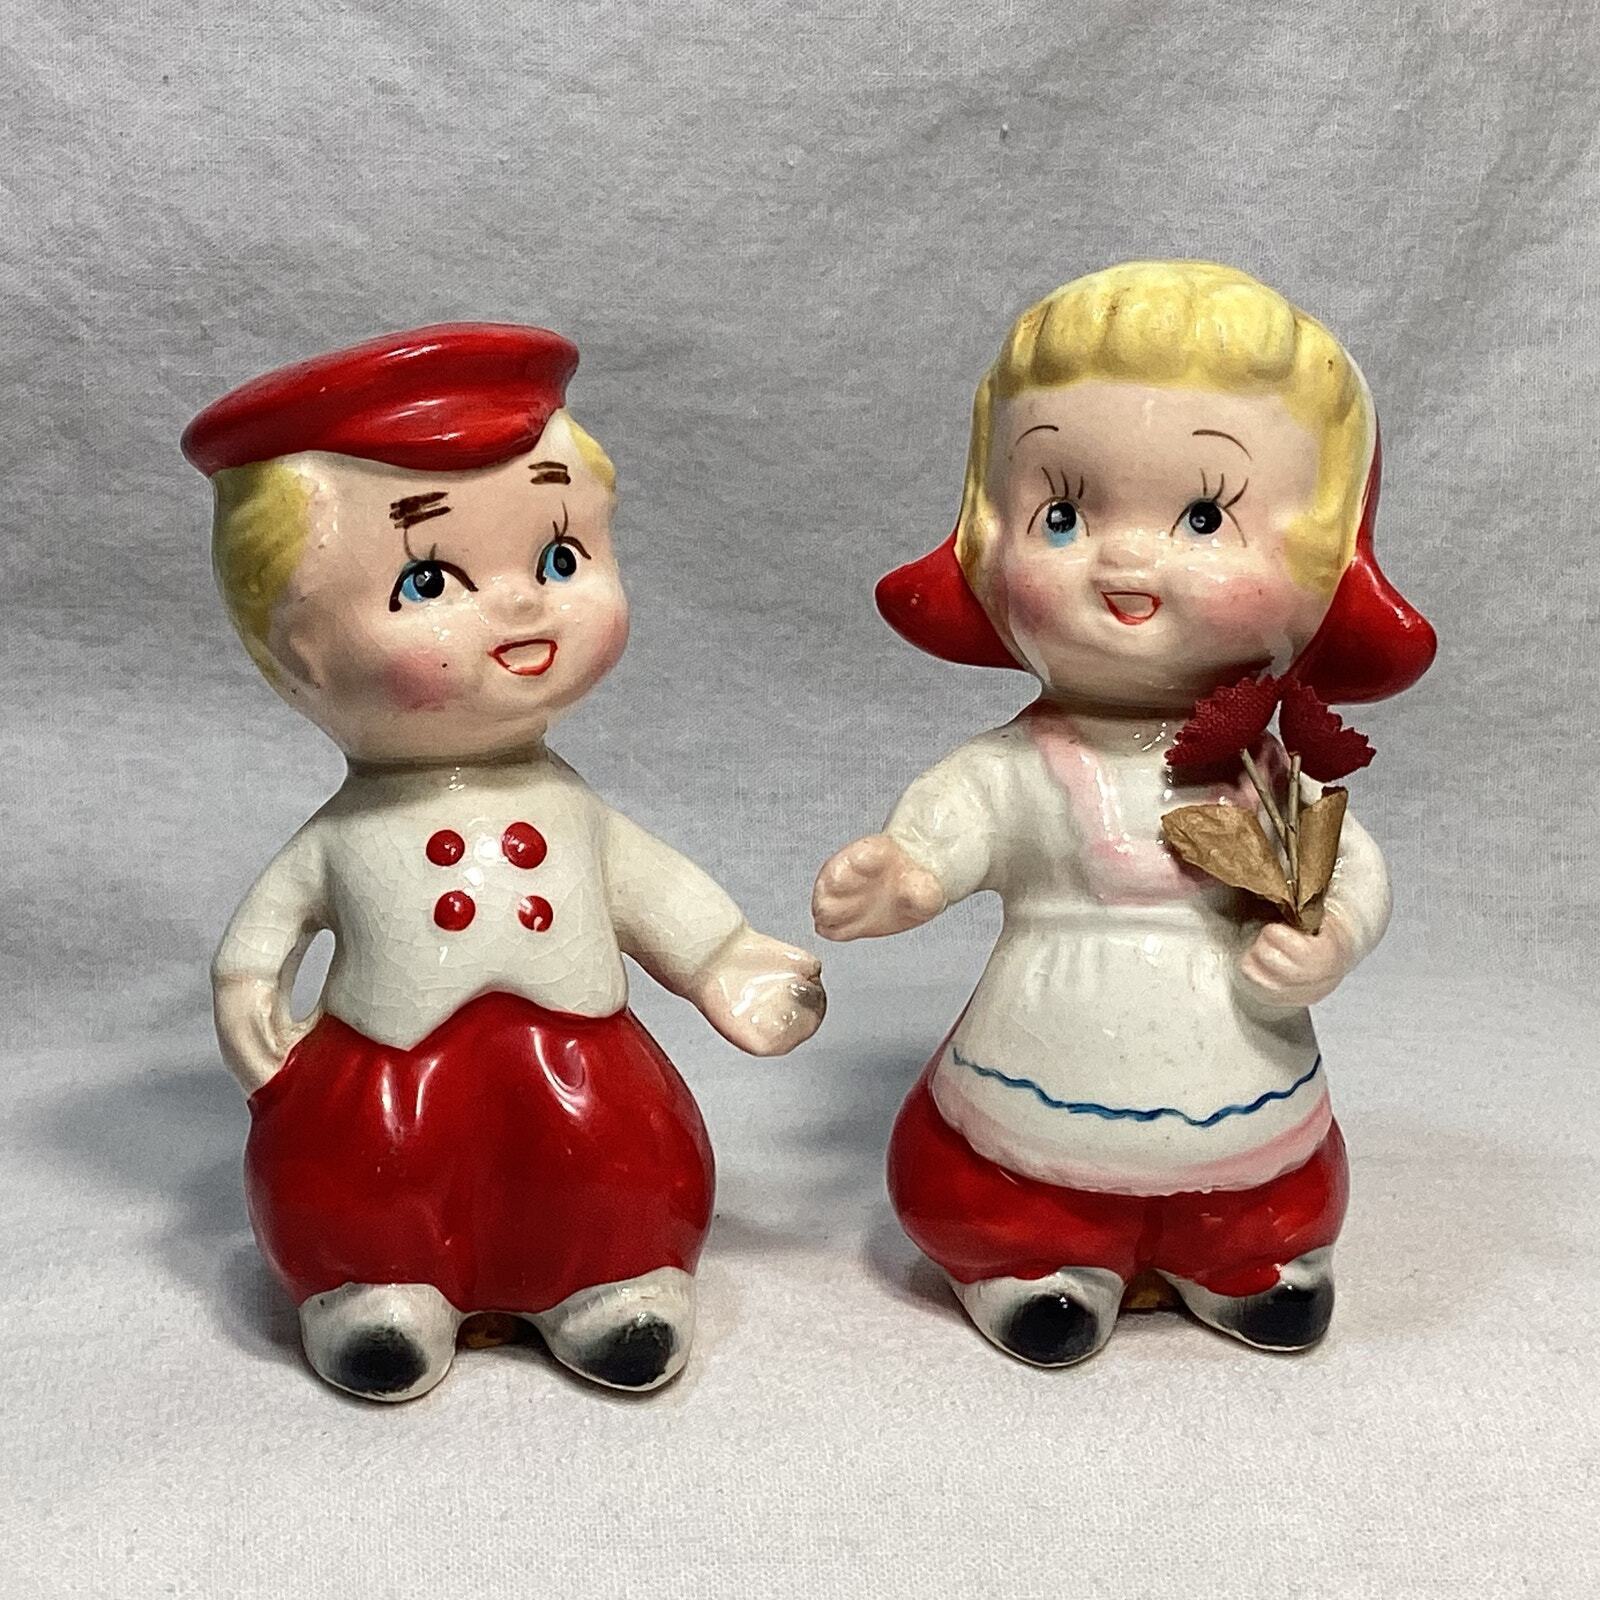 Vintage Dutch Boy & Girl with Flowers Salt and Pepper Shakers